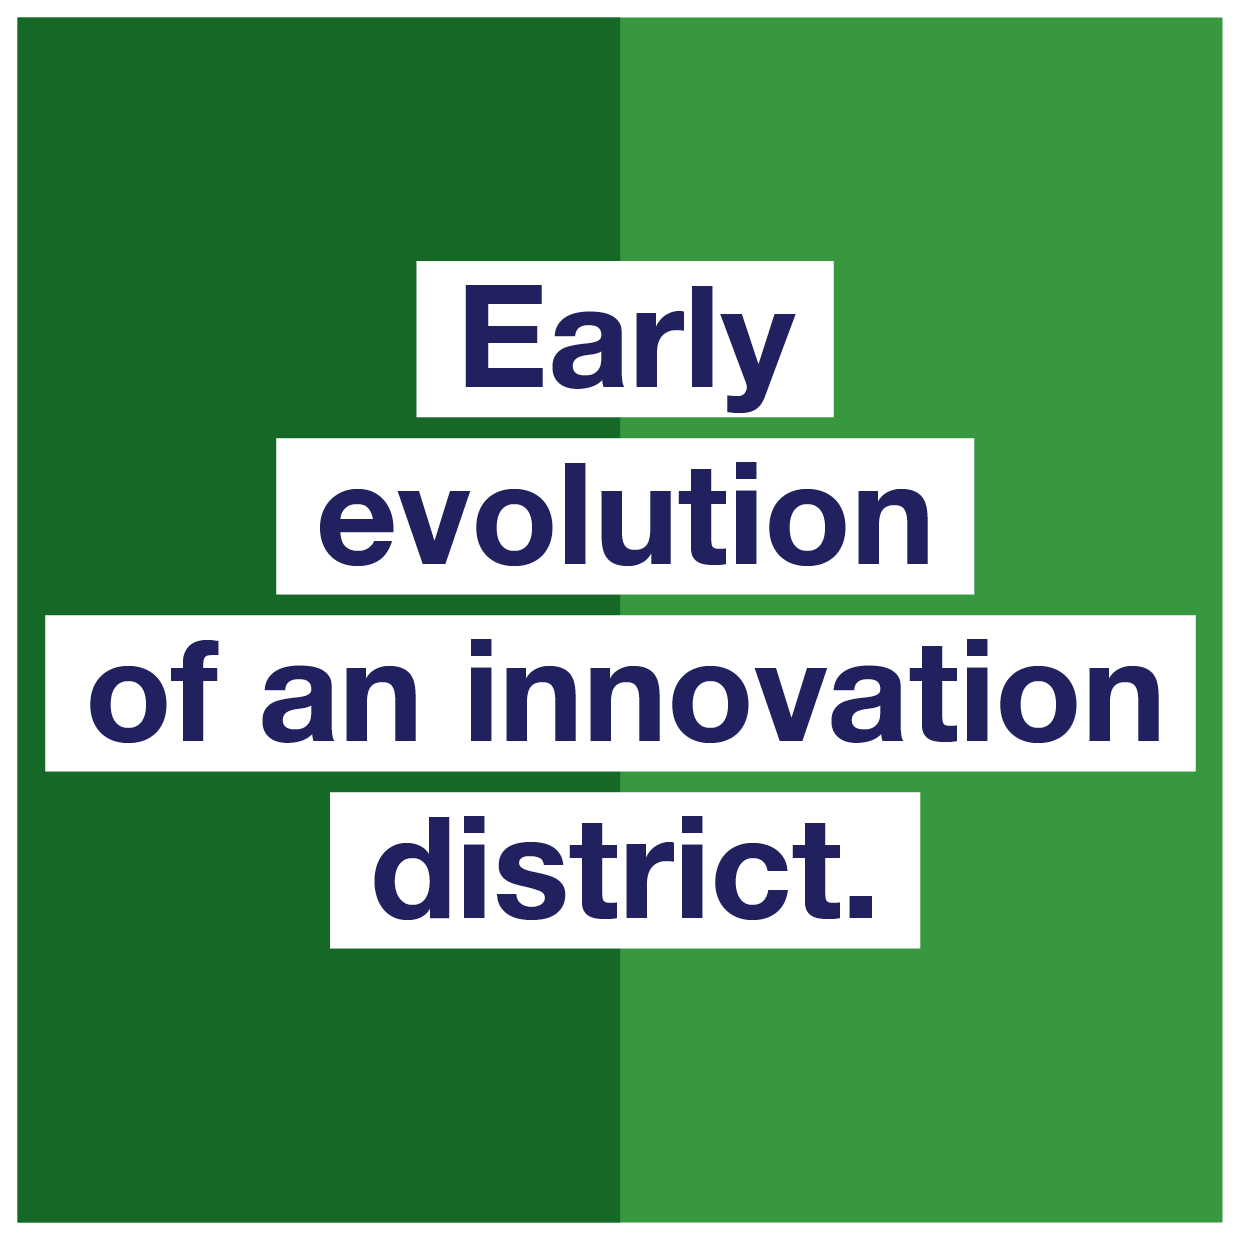 Branded graphic square background with heading: Early evolution of an innovation district.